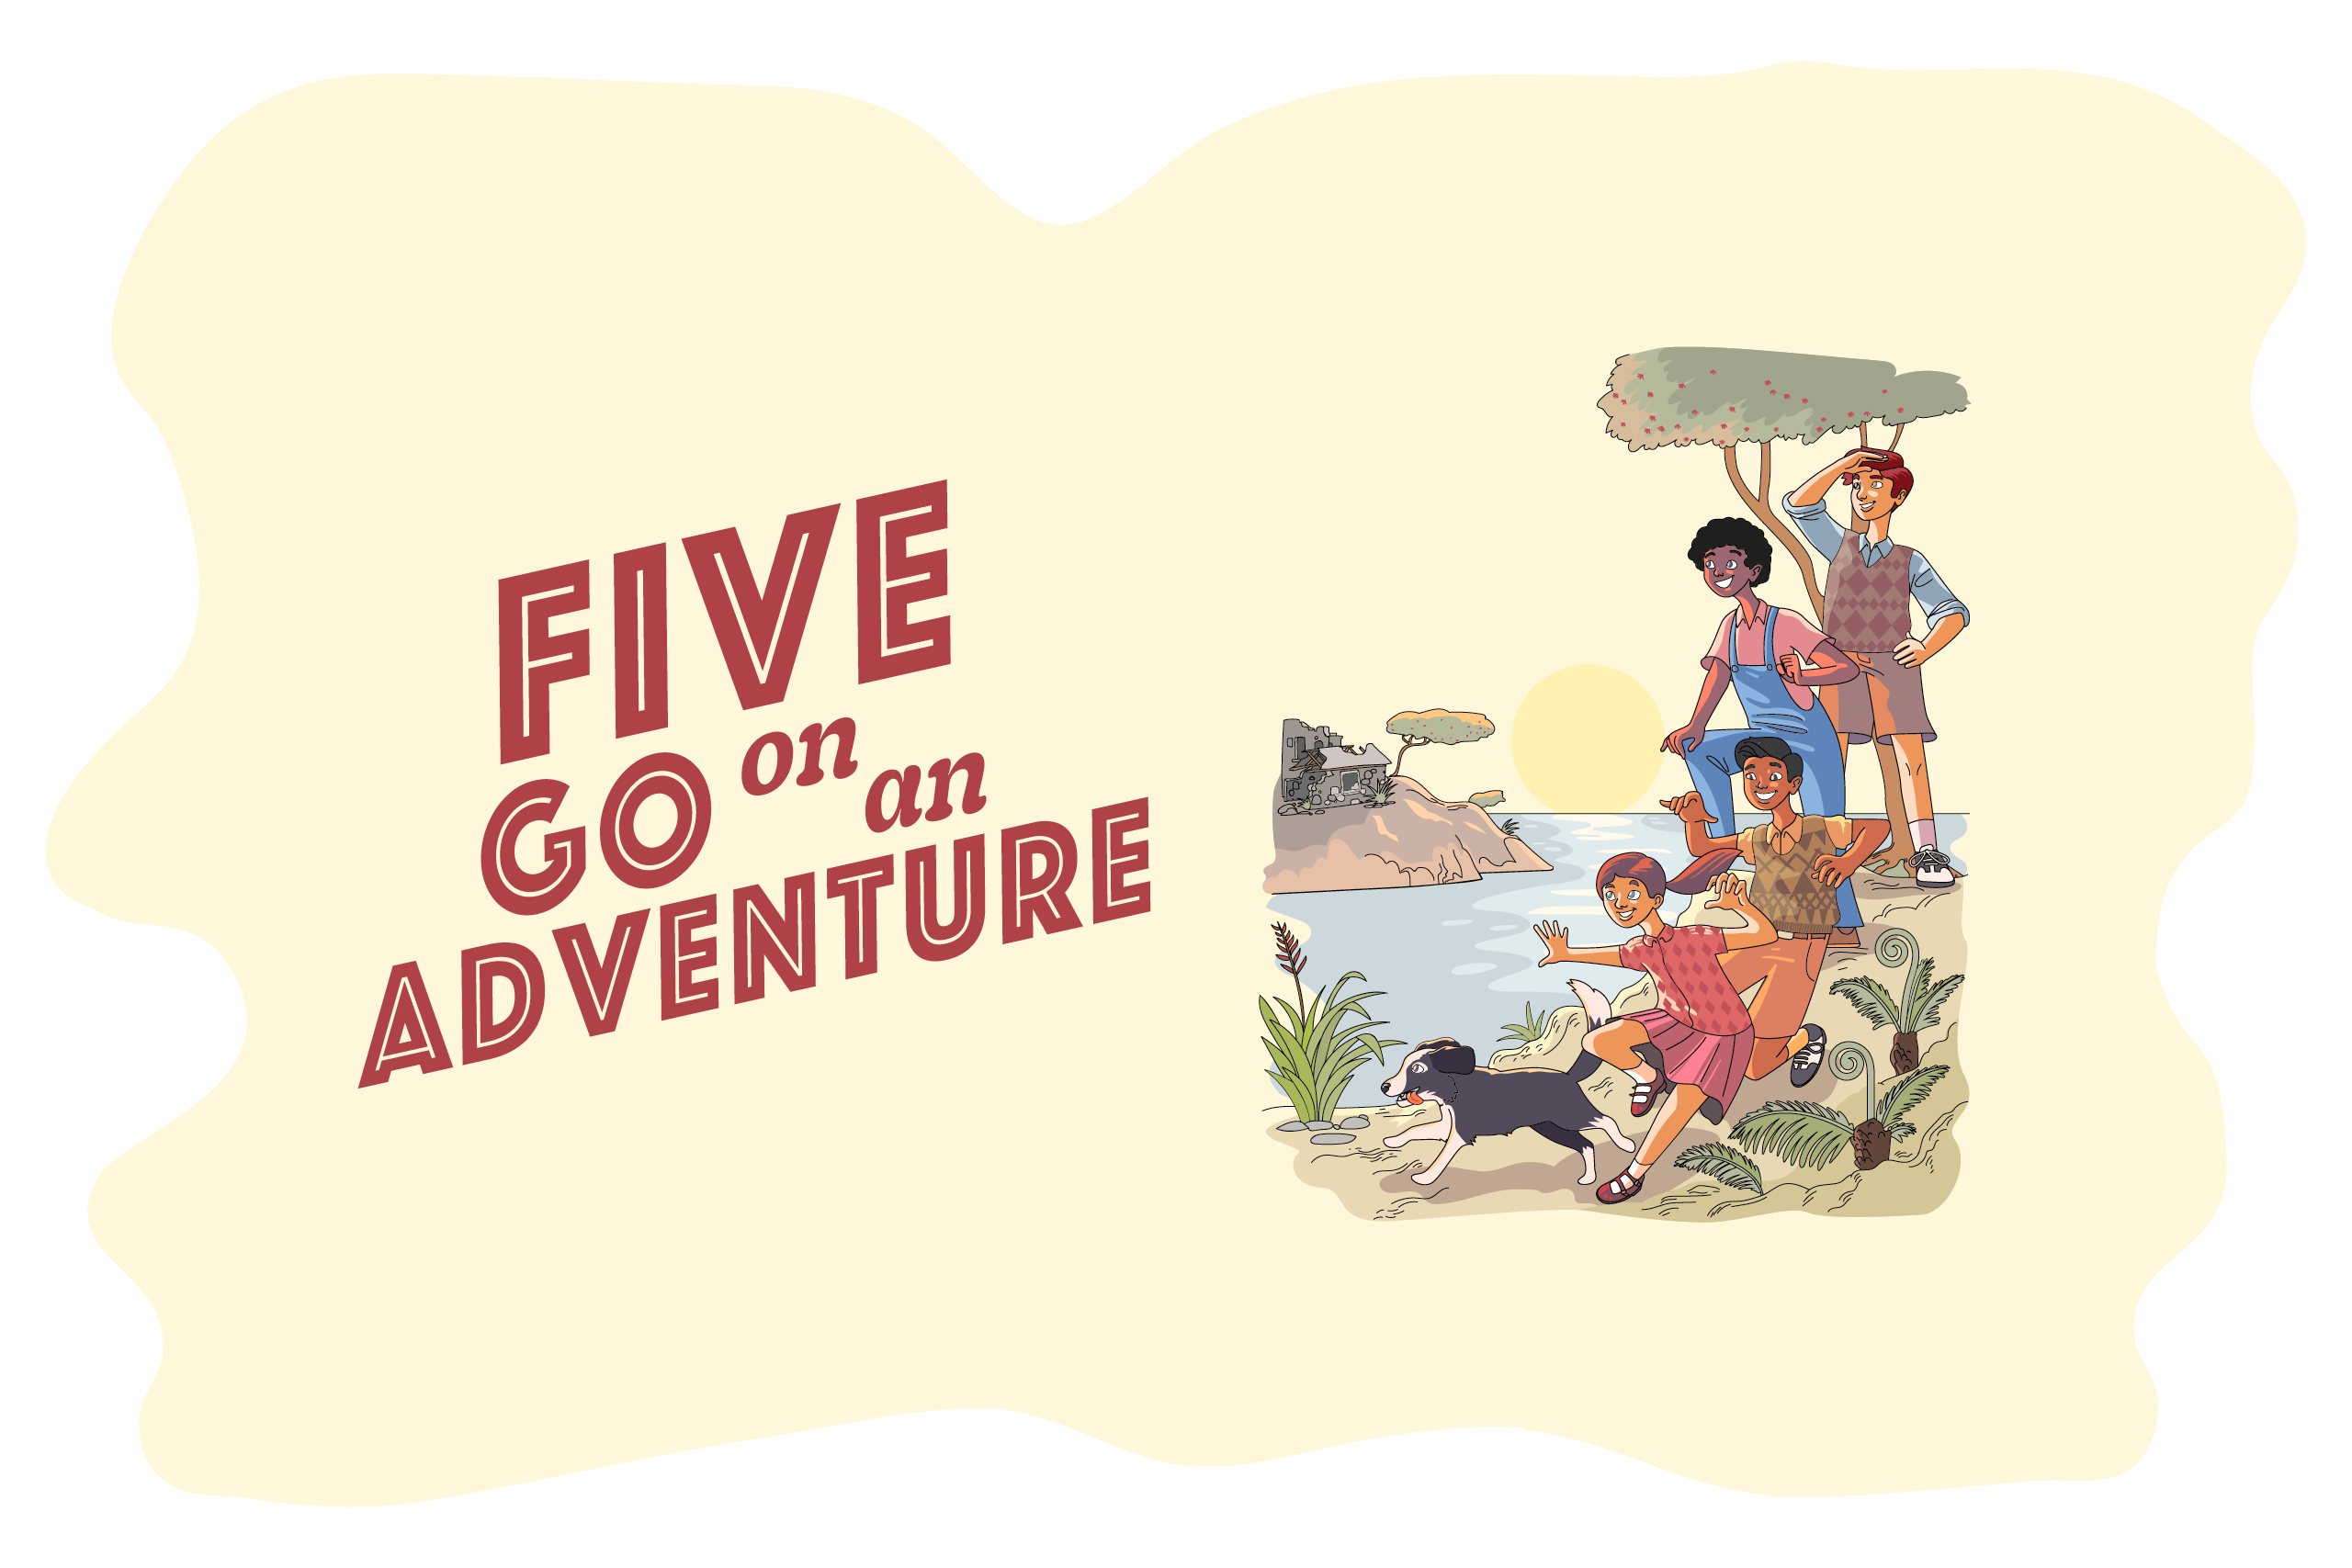 Illustration of five children and a dog standing on a beach with the title Five go on an adventure written on the left